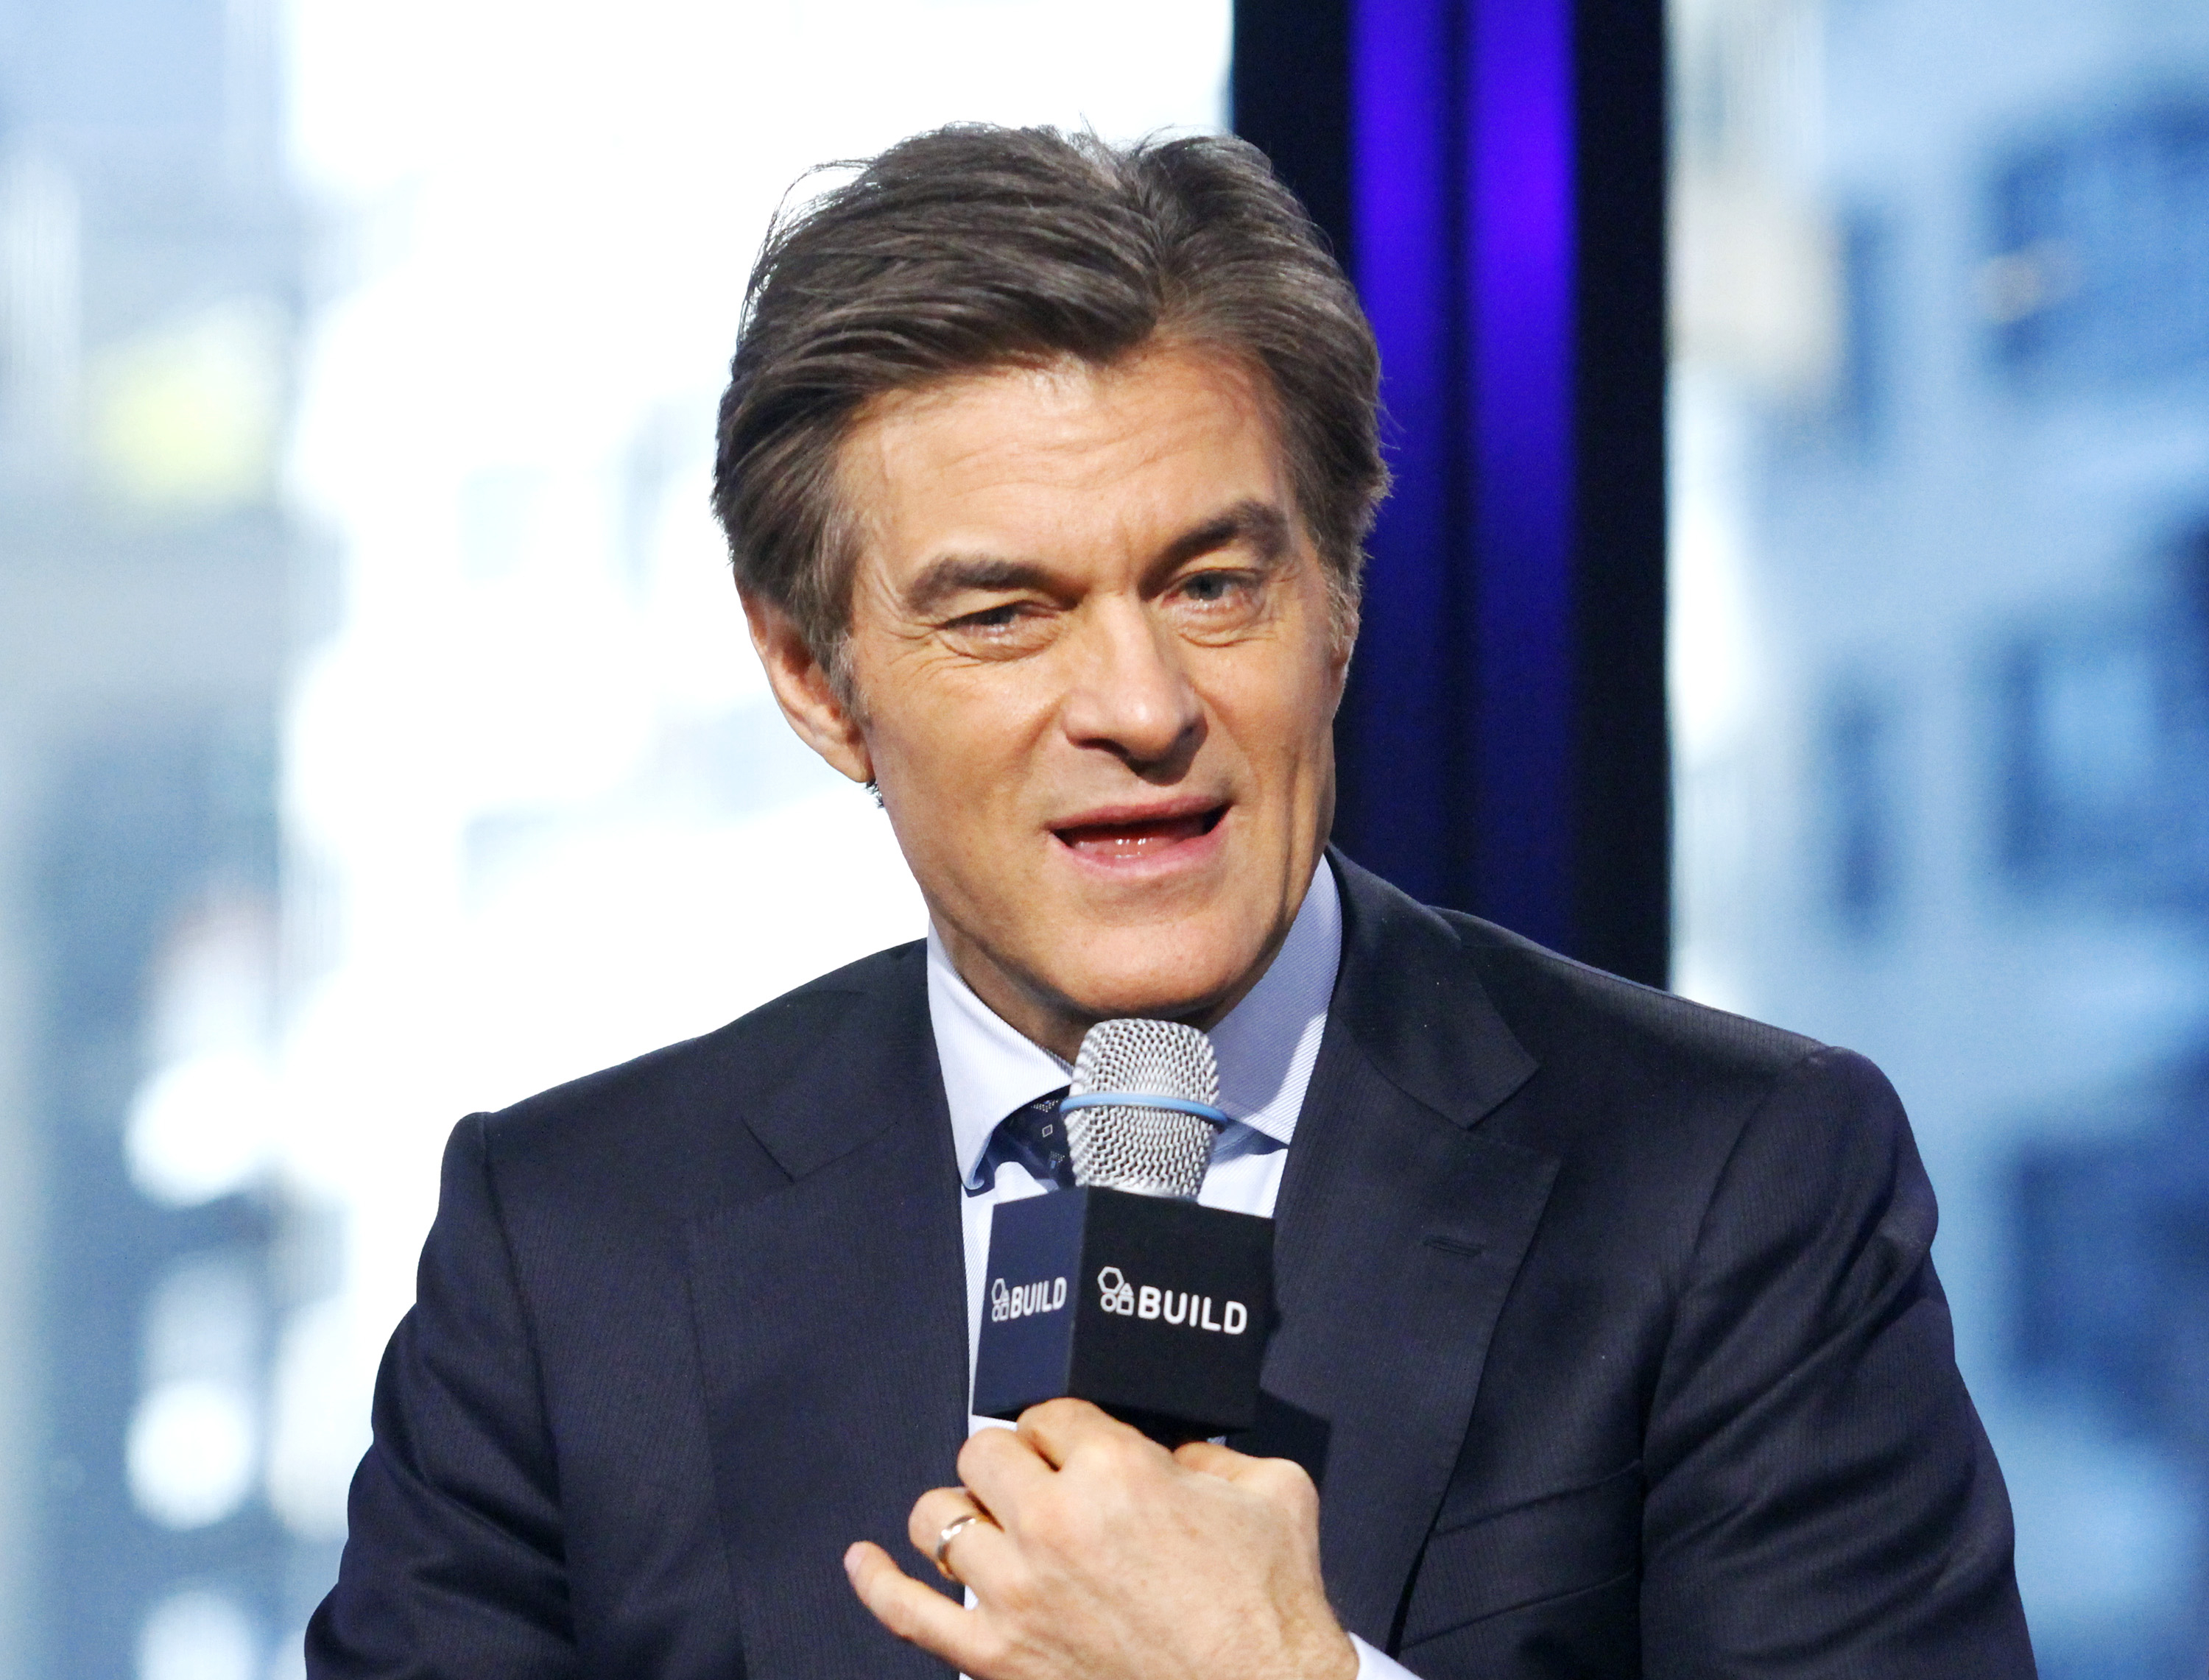 Dr Oz talking on a microphone